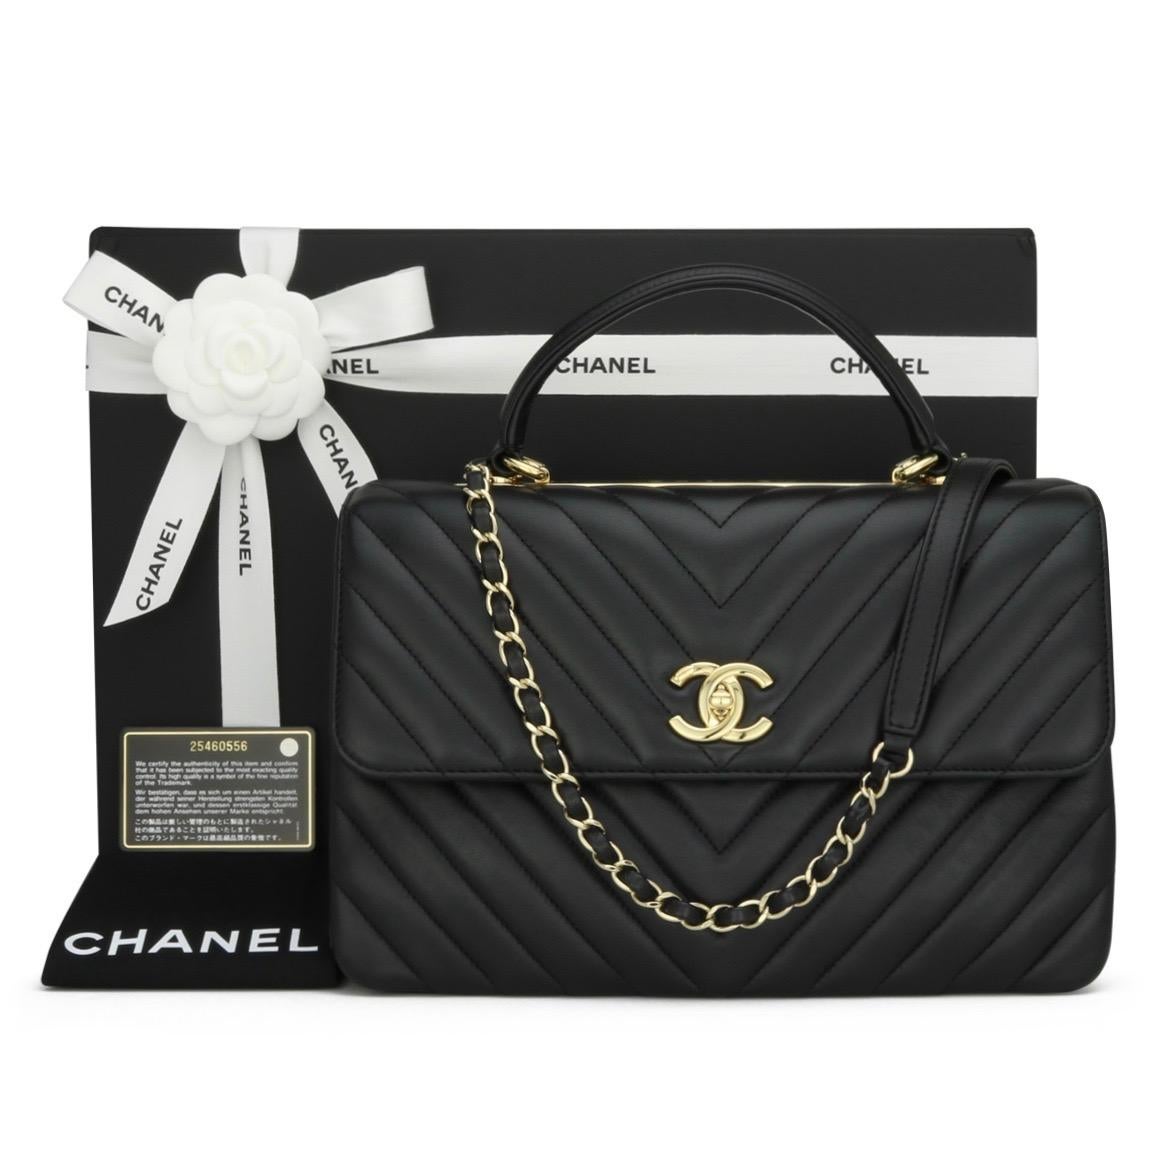 CHANEL Trendy CC Chevron Top Handle Bag Medium Black Lambskin with Light Gold-Tone Hardware 2018 – 18P.

This stunning bag is in excellent condition. It still holds its original shape, and the hardware is very shiny. The leather smells fresh, as if